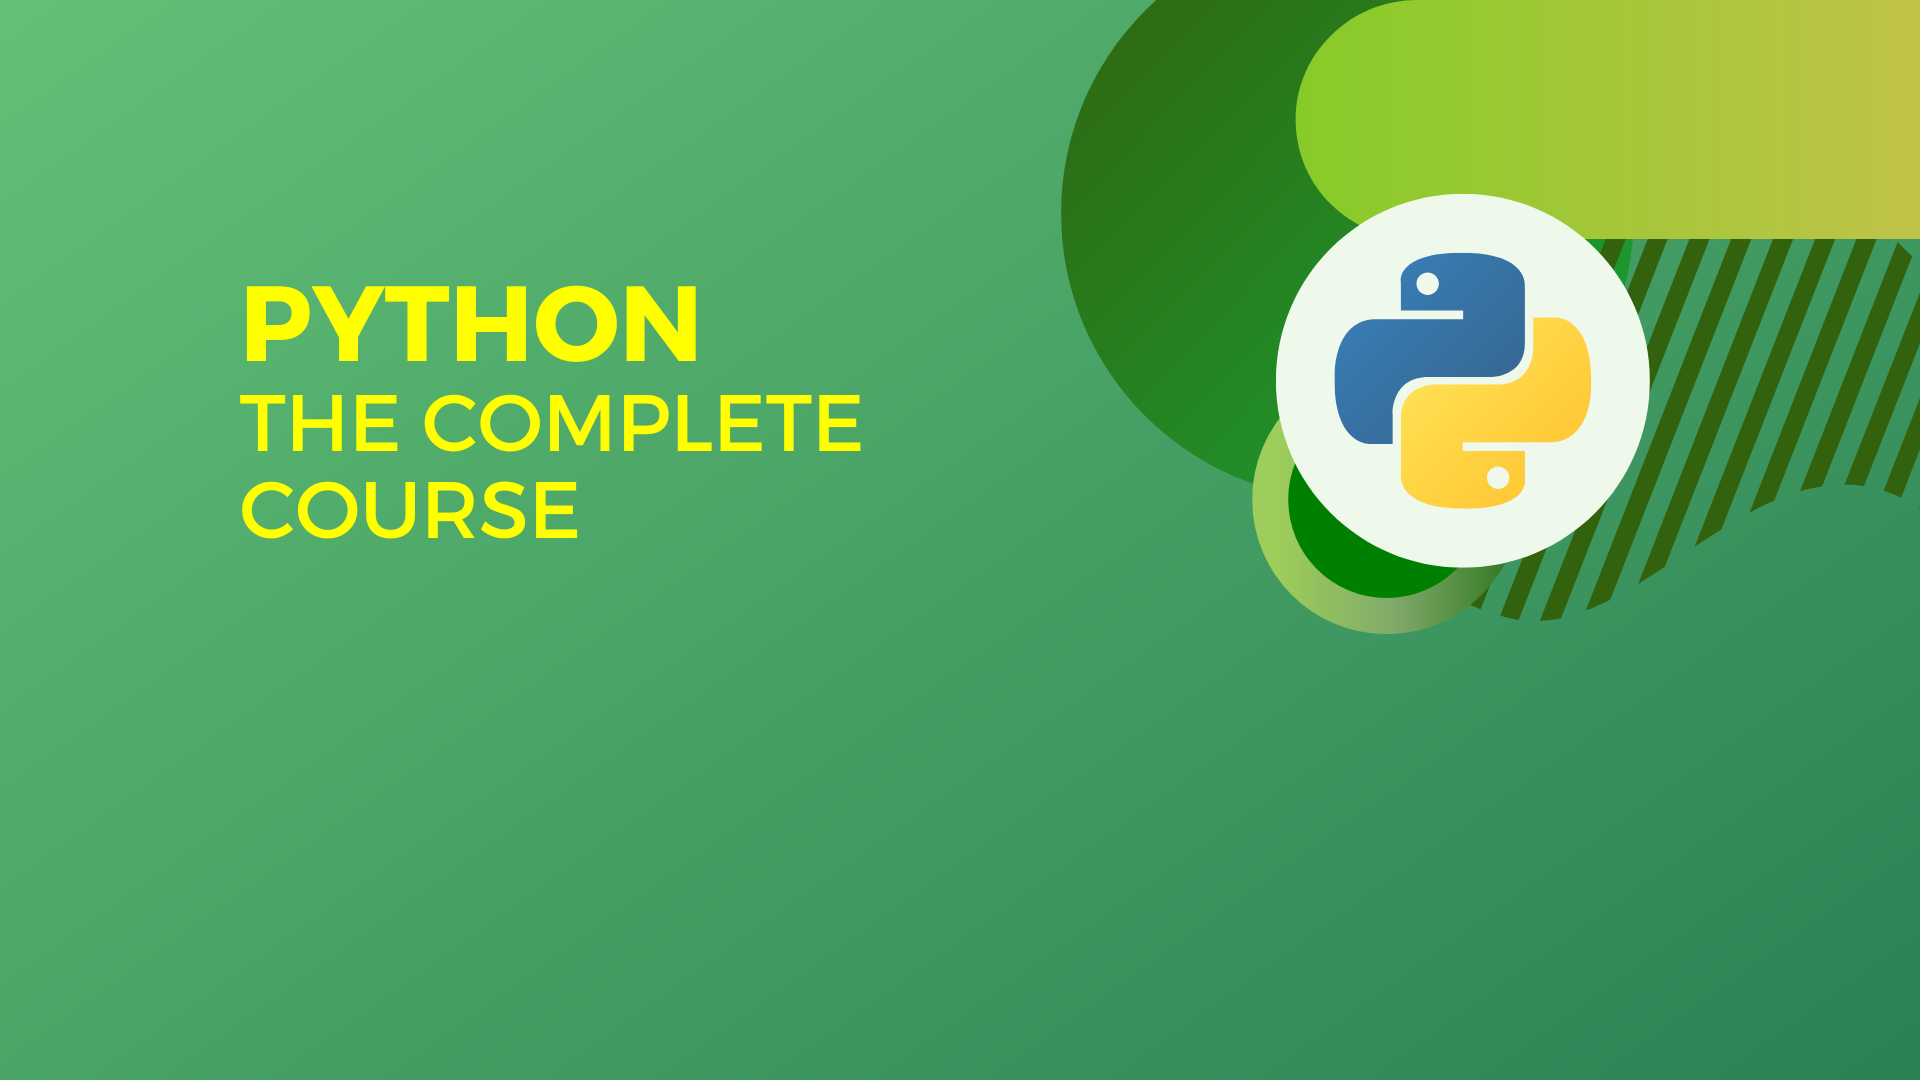 PYTHON, The complete course